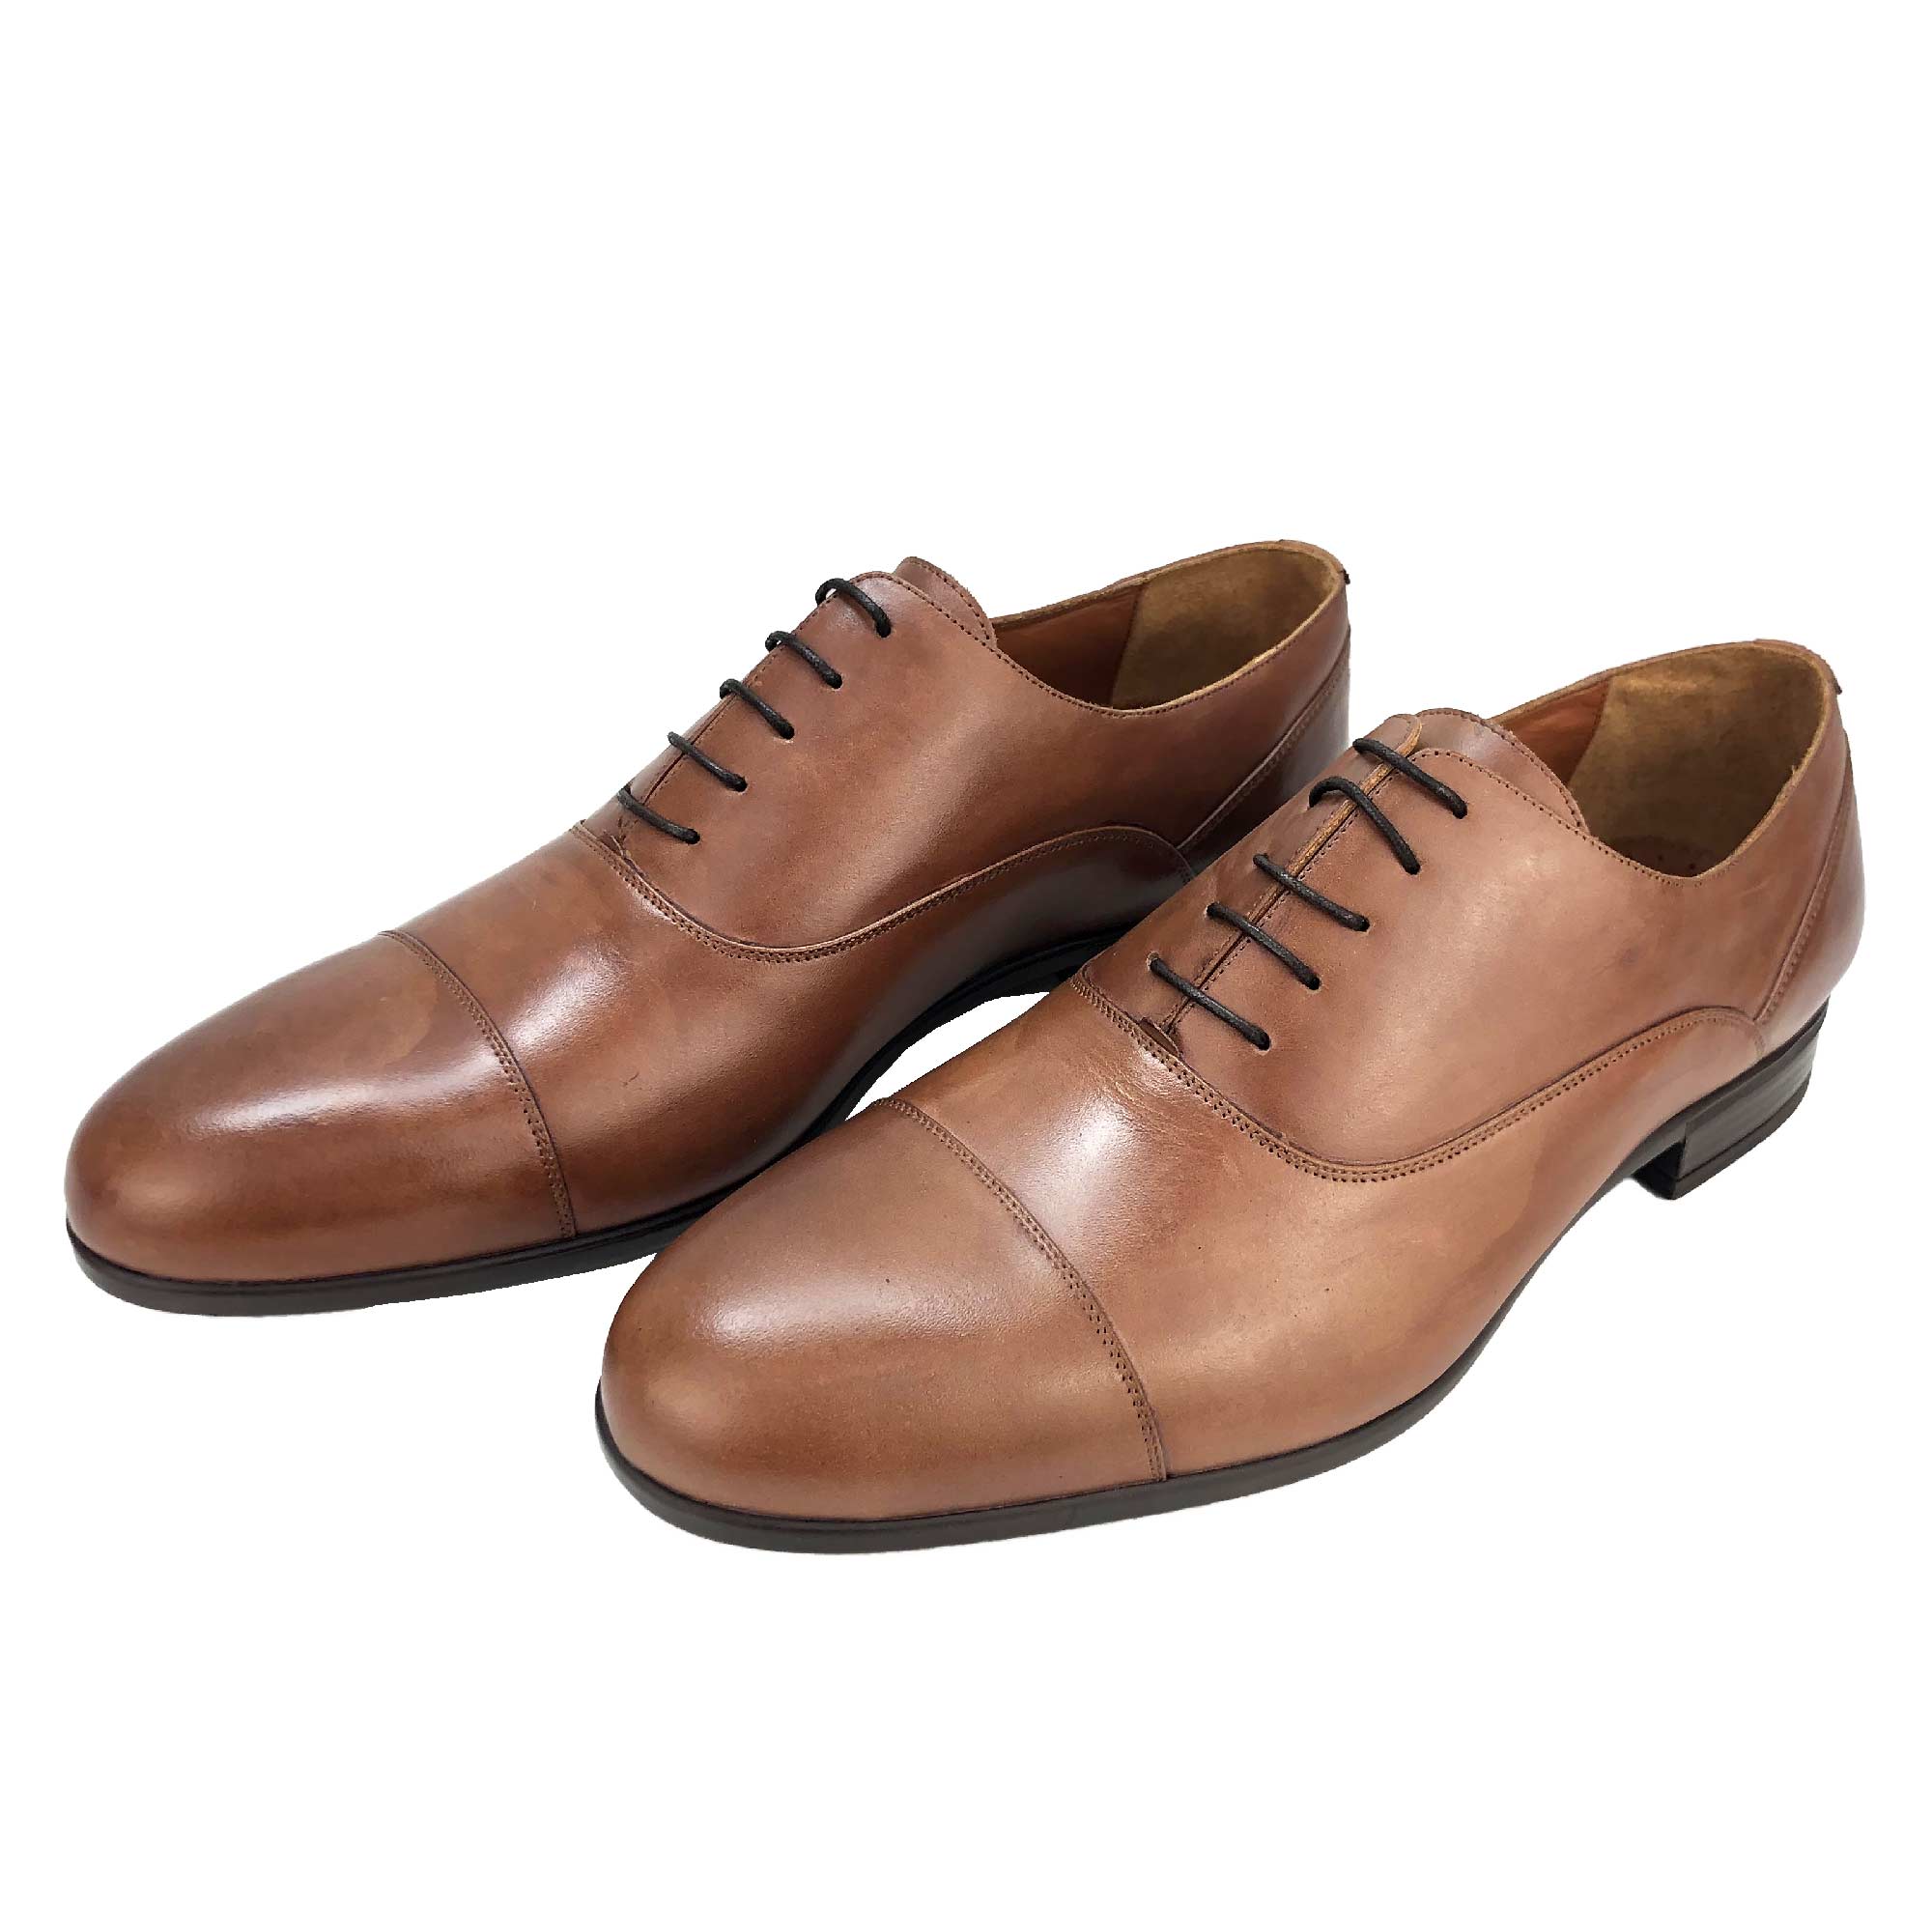 CH325-019  - Chaussure Cuir Taba - deluxe-maroc